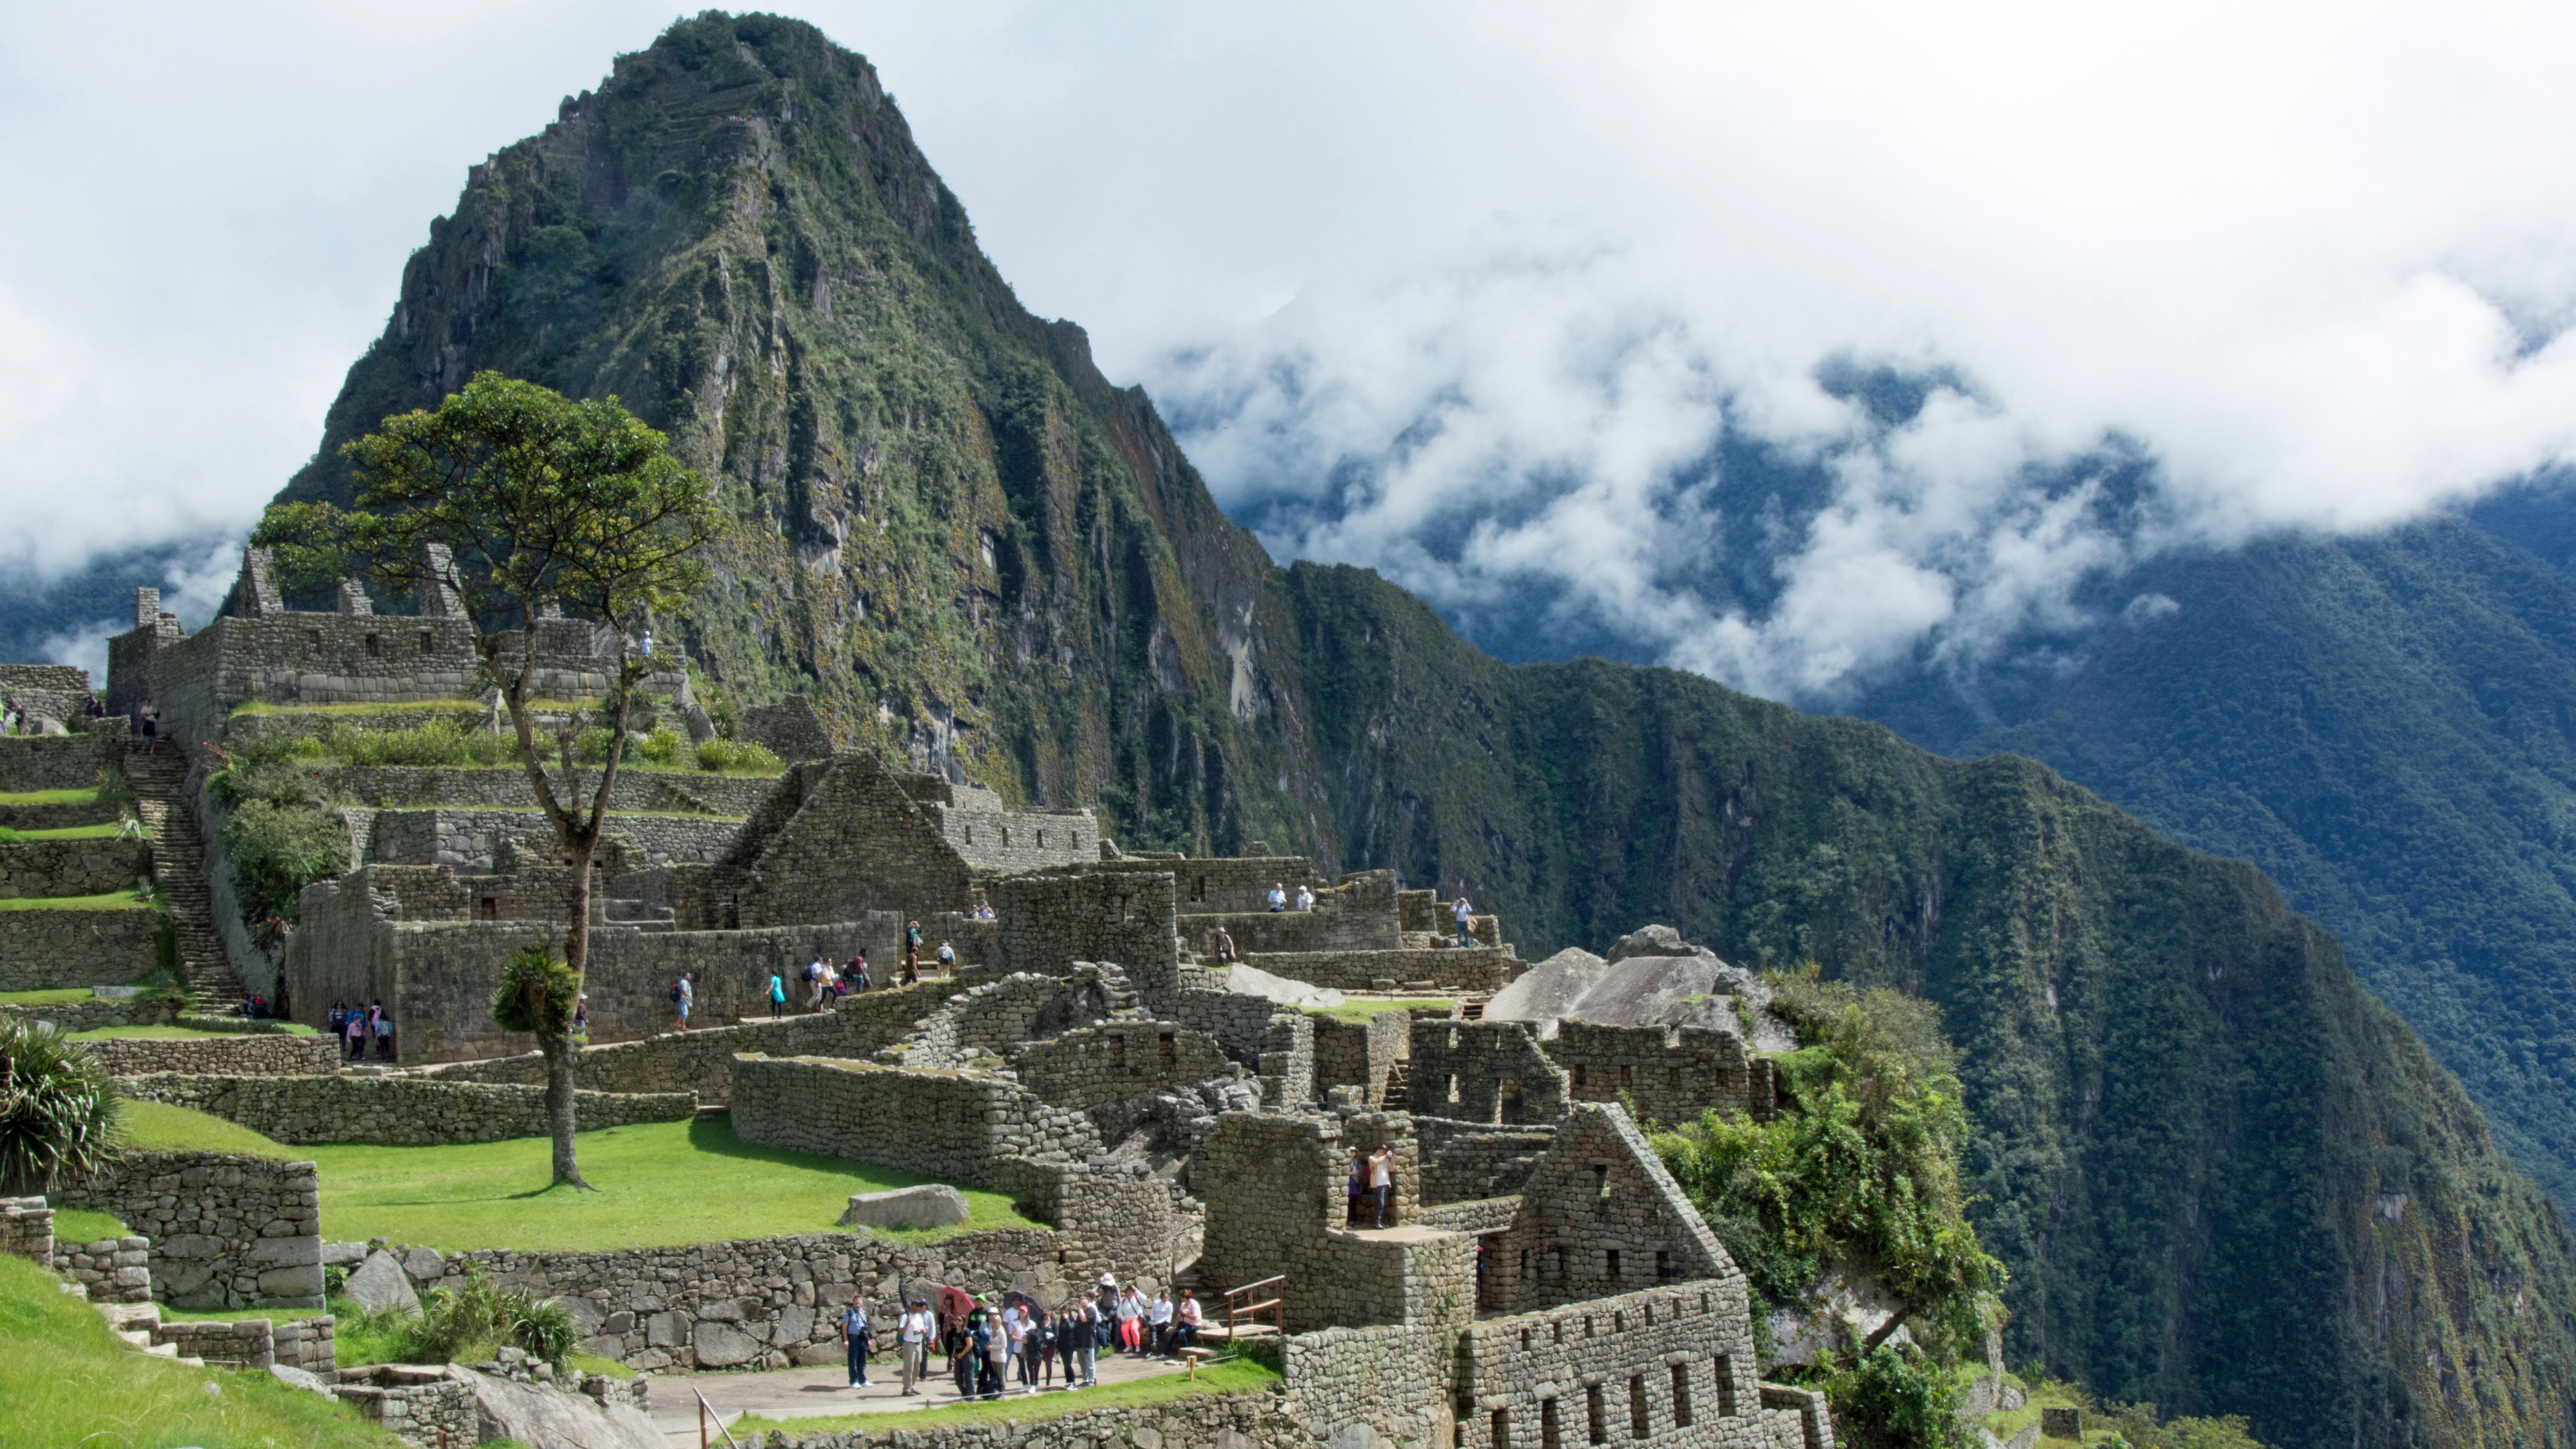 Machu Picchu, mountain, architecture, the past, history, group of people